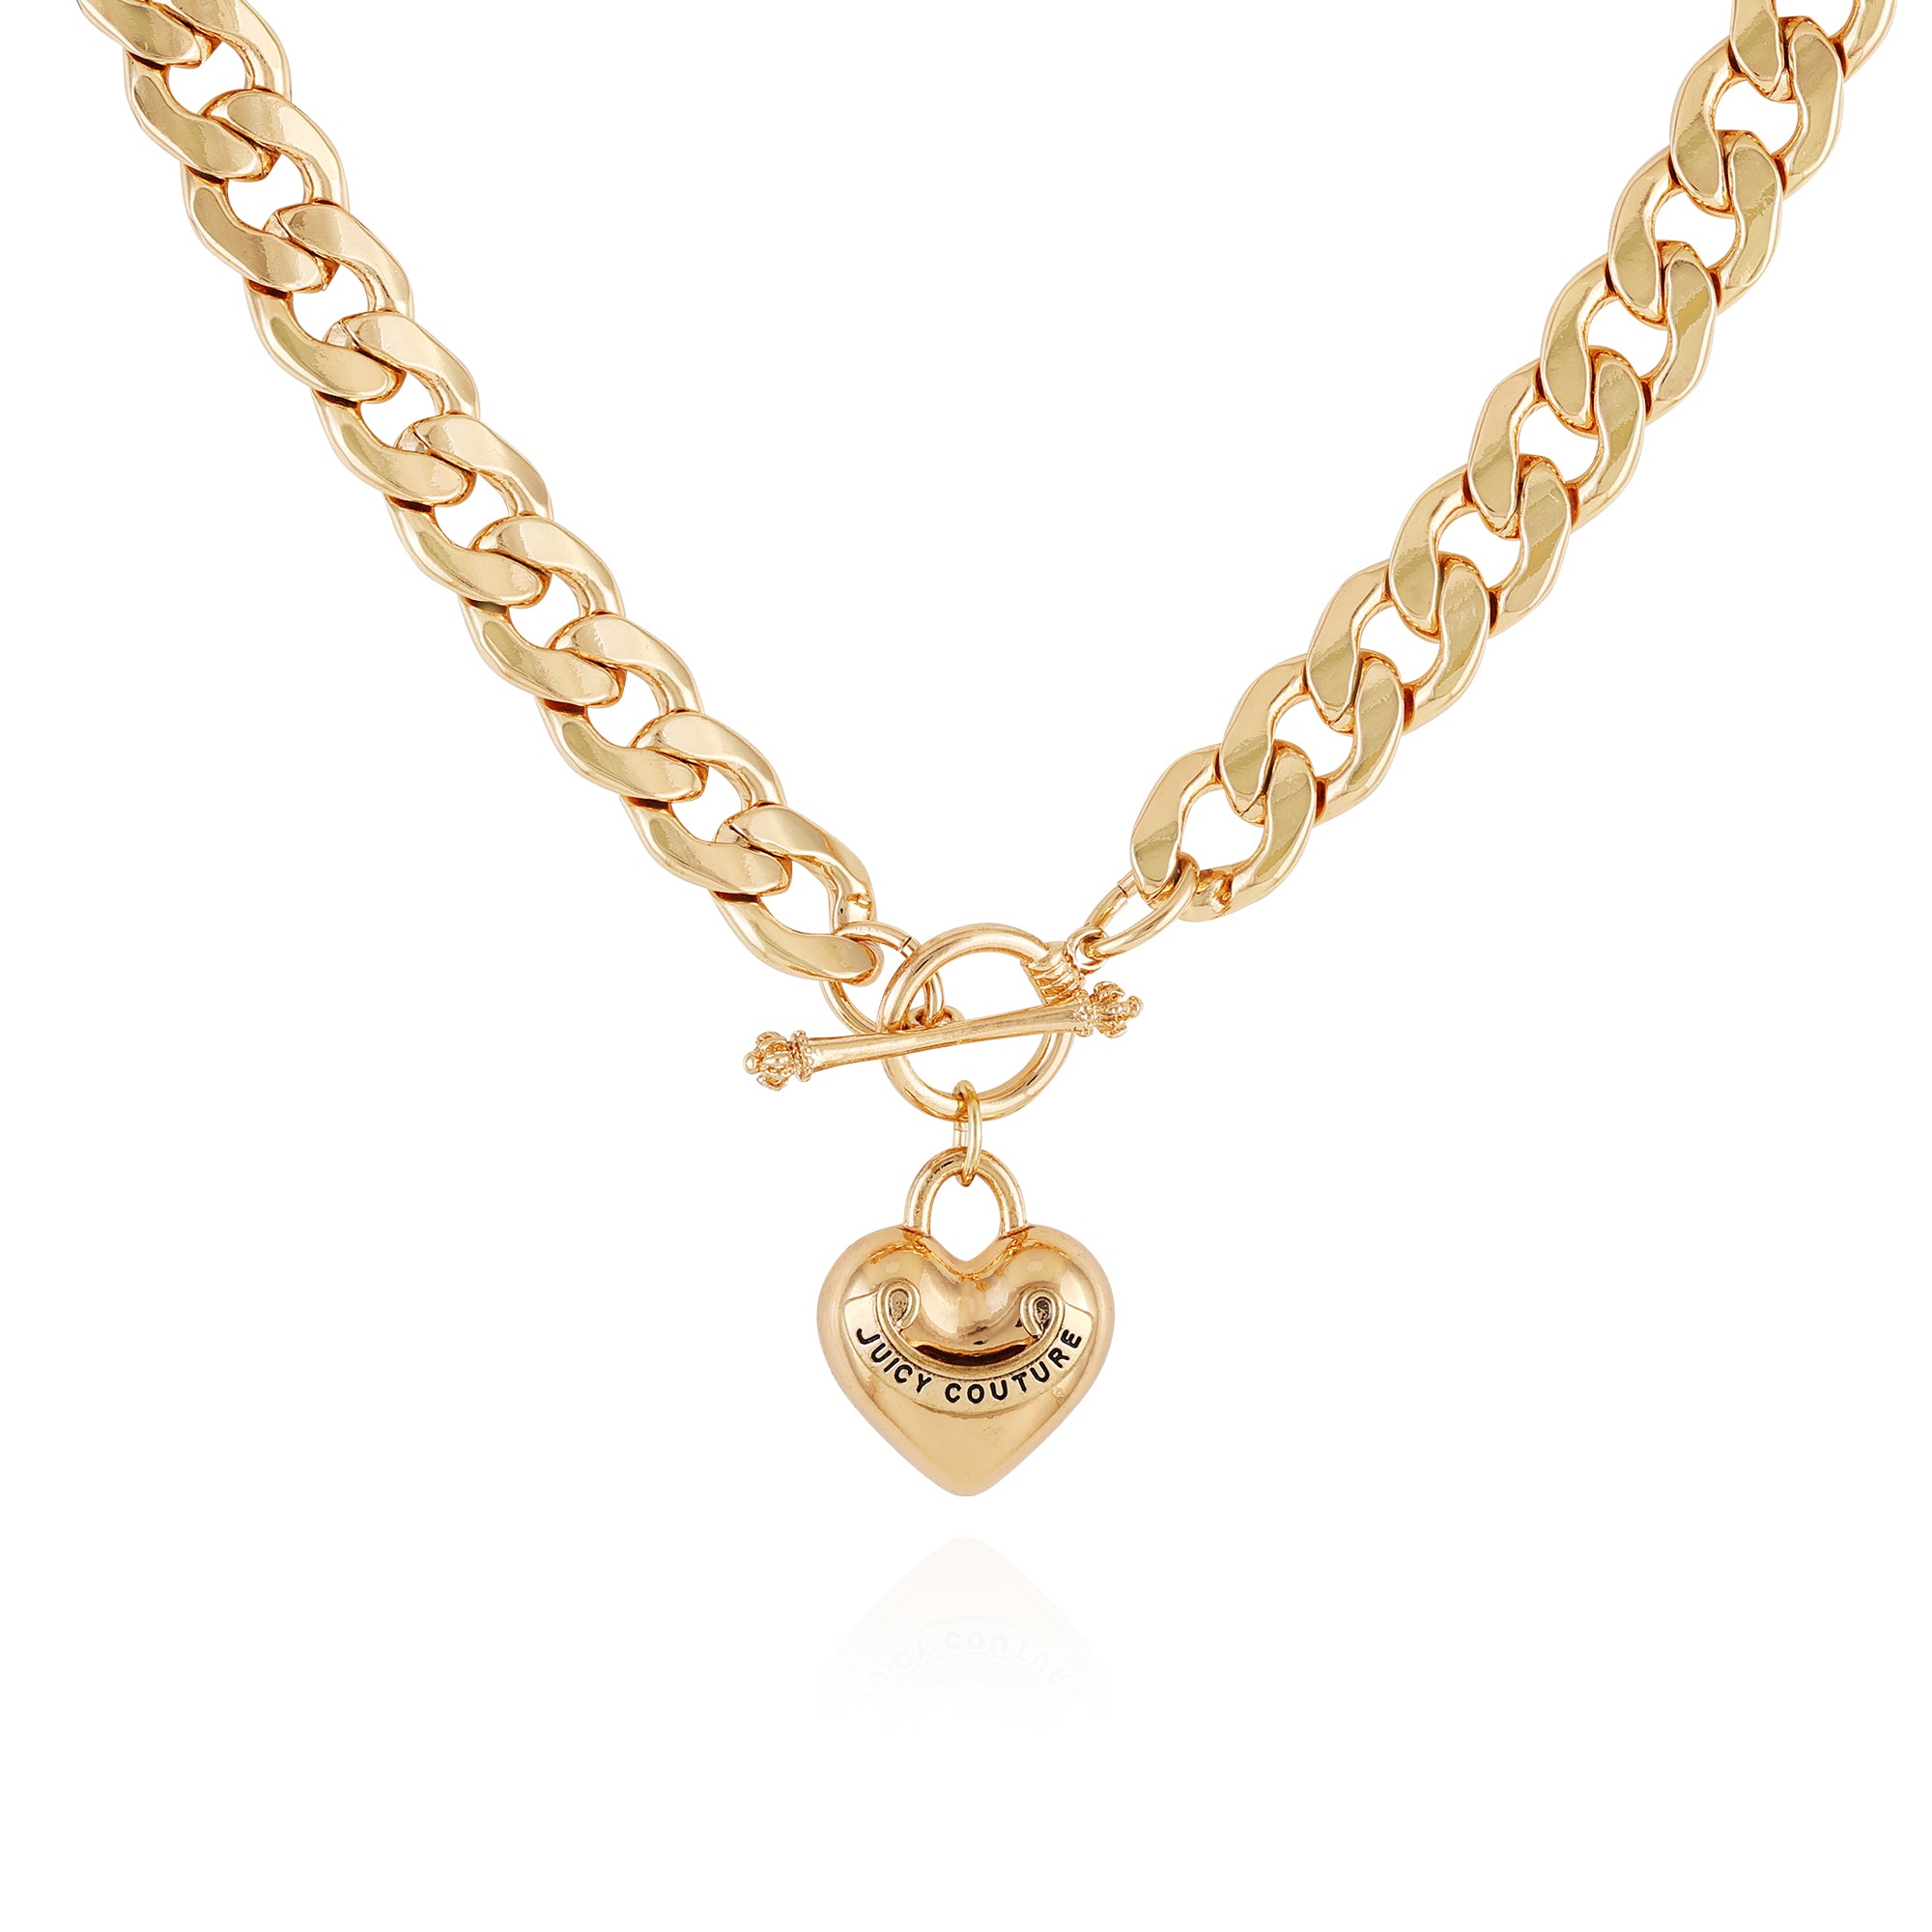 Juicy Couture Chain Heart Pendant Necklace - Gold - One Size